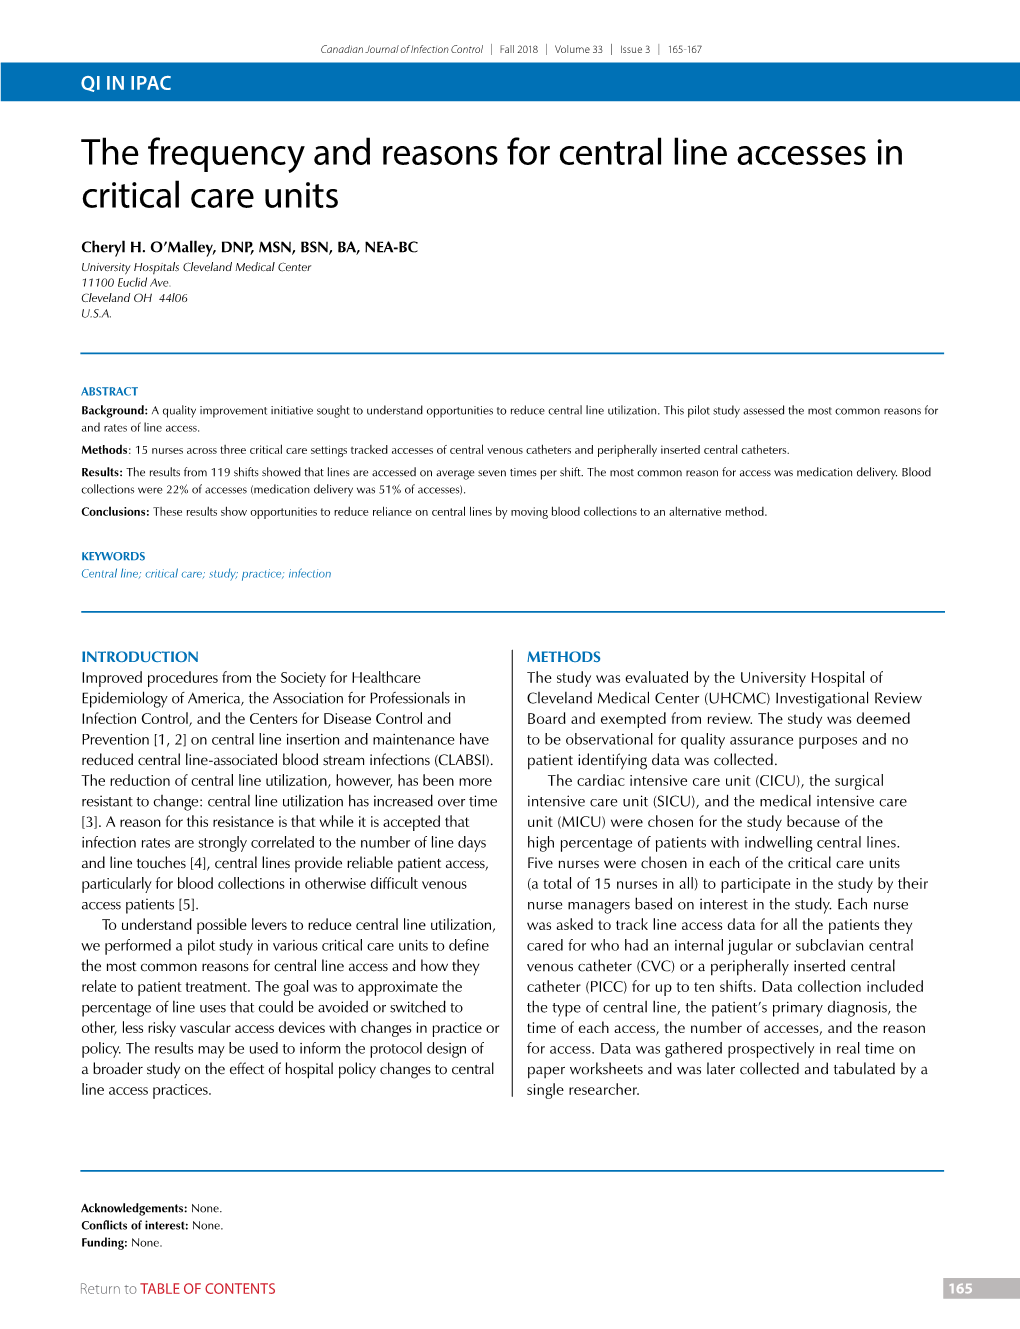 The Frequency and Reasons for Central Line Accesses in Critical Care Units